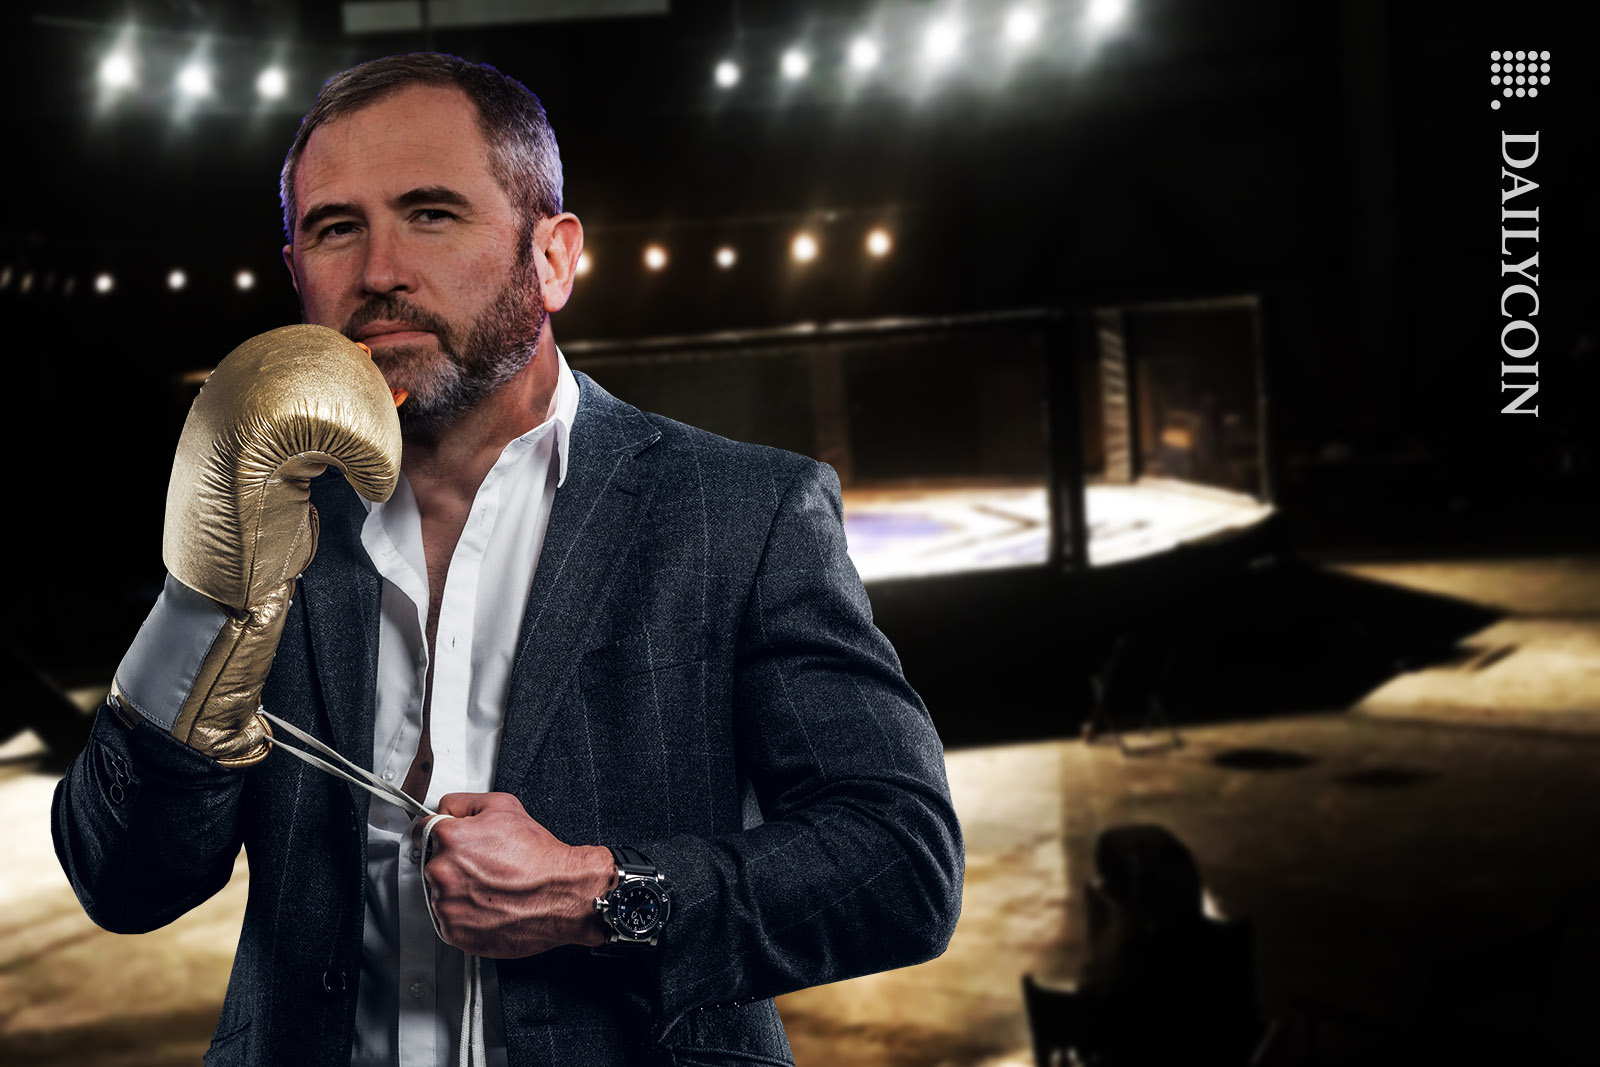 Bred Garlinghouse putting on Golden boxing gloves, ready for a fight.